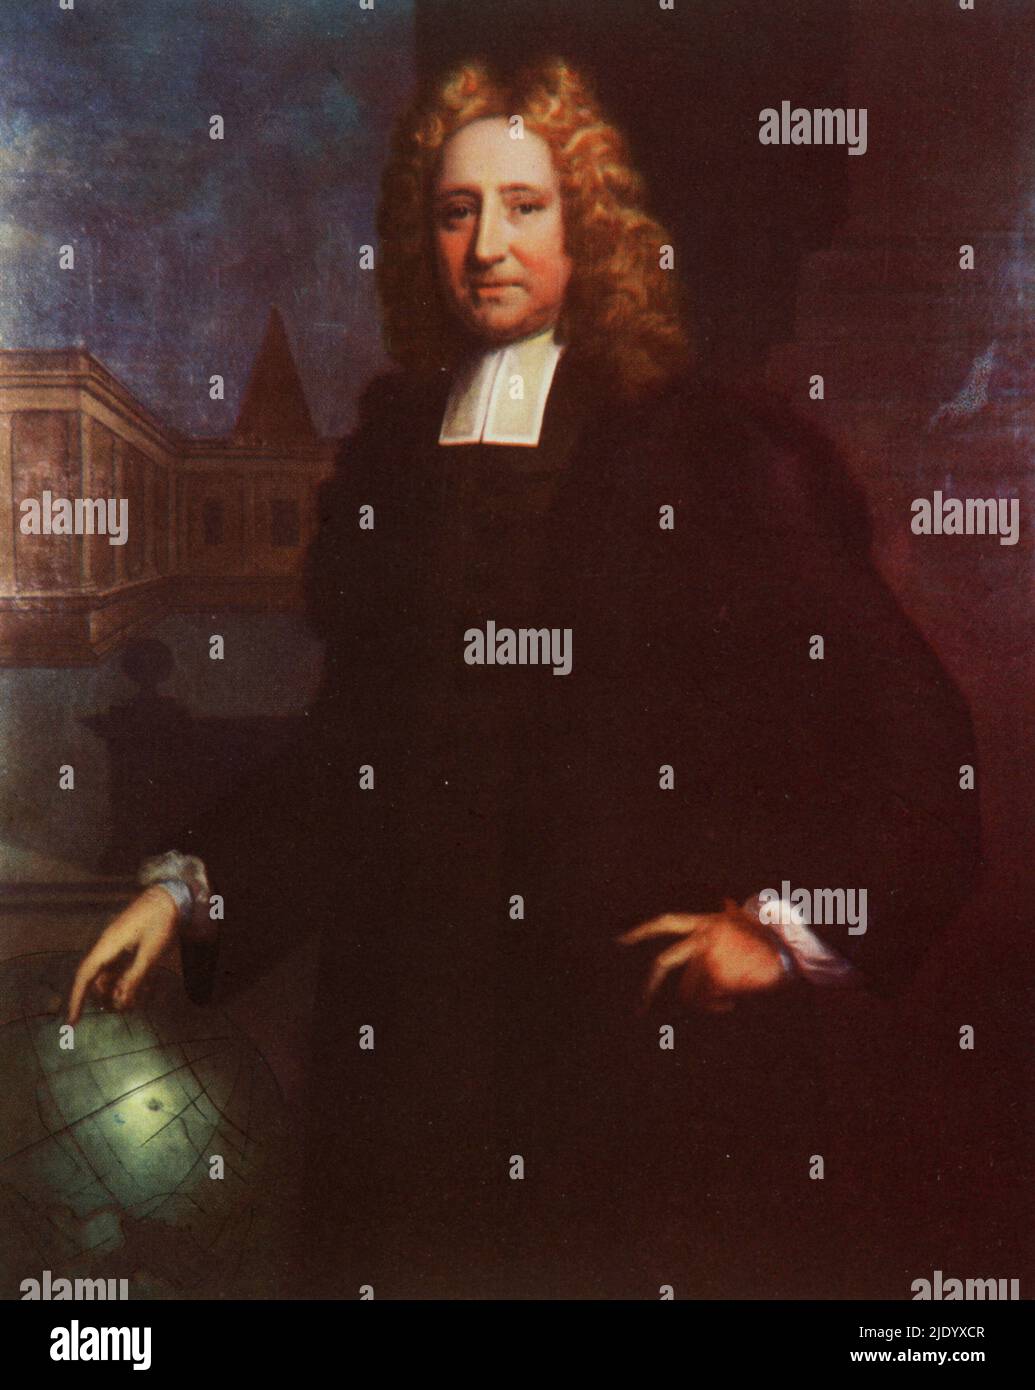 Edmond Halley (1656-1742), 1712. By Thomas Murray (1663-1735). English astronomer, geophysicist, mathematician, meteorologist, and physicist. He was the second Astronomer Royal in Britain, succeeding John Flamsteed in 1720. Stock Photo